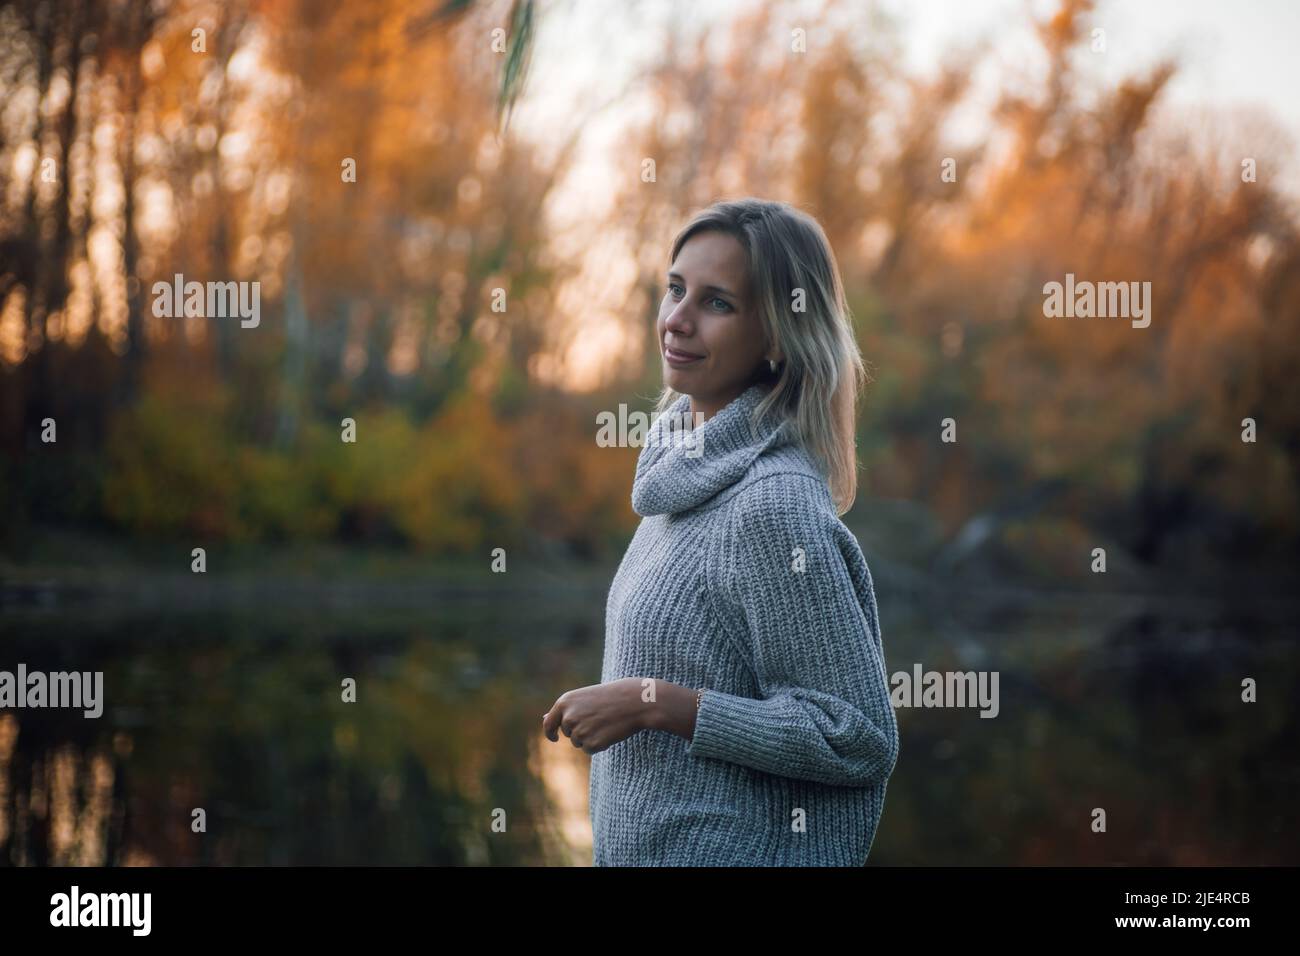 Beautiful blonde woman standing by river in forest, looking away smiling and posing with trees covered with sunset in background, wearing grey sweater Stock Photo